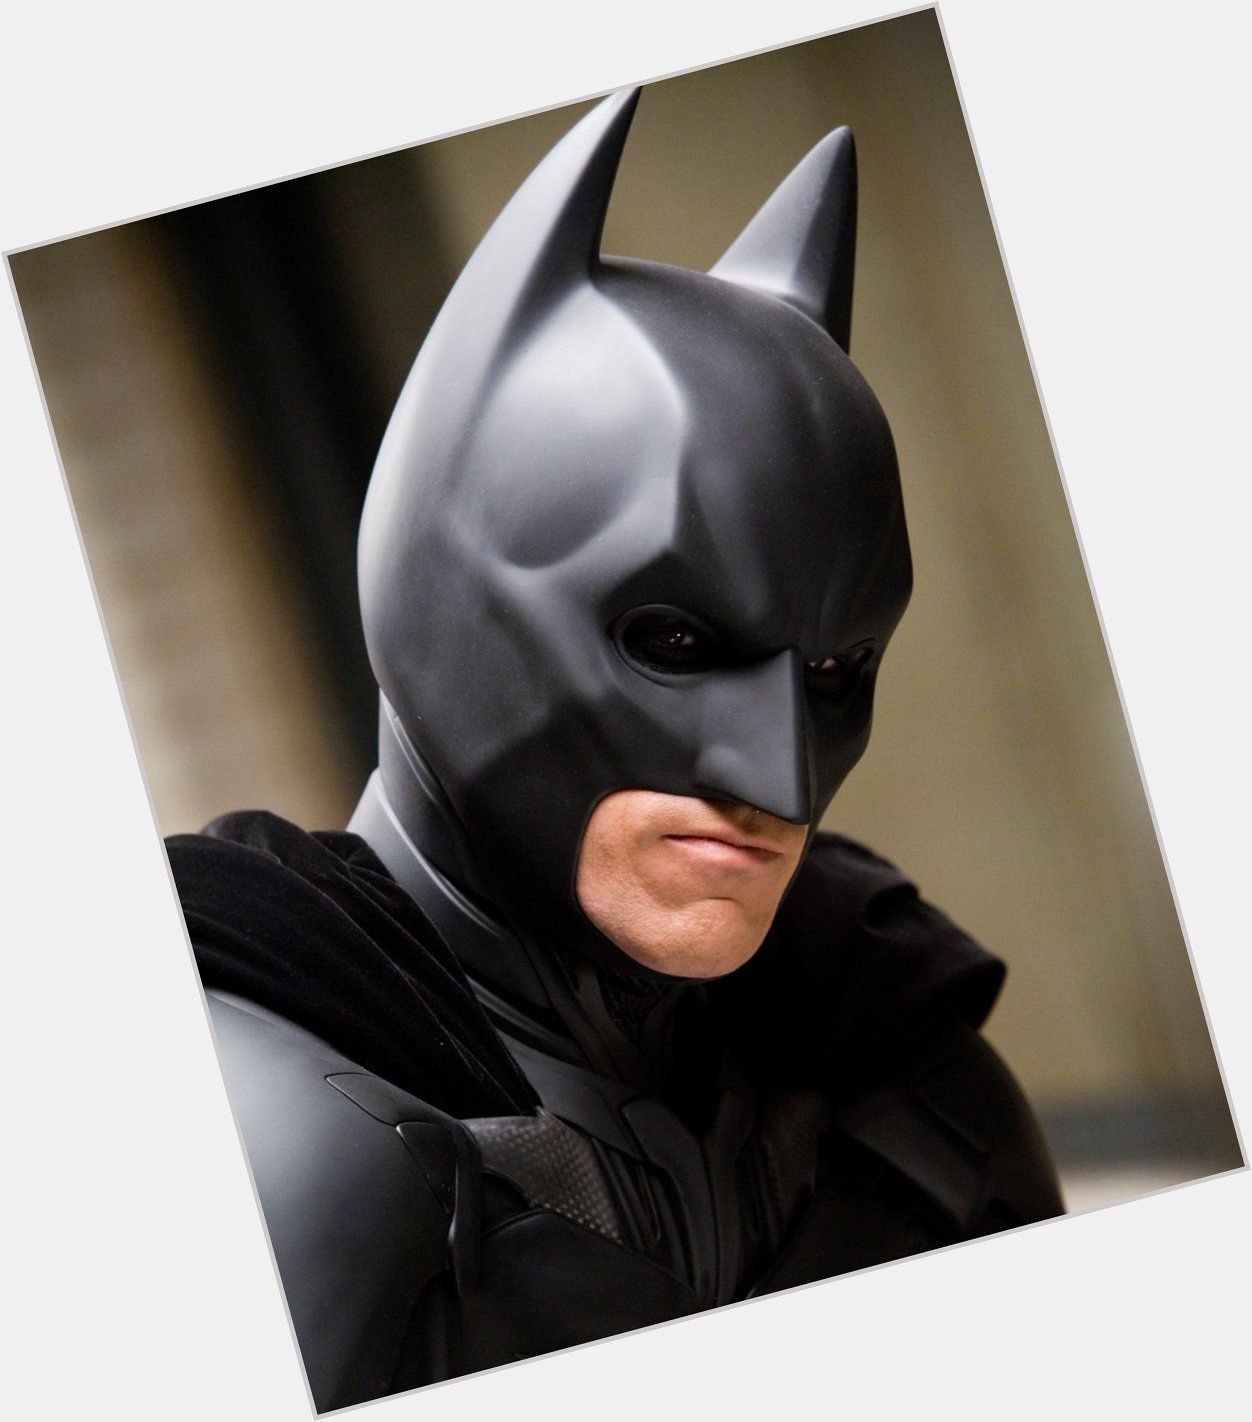 Christian Bale as Batman in Trilogy Remessage to join us in wishing the DC icon a happy birthday! 